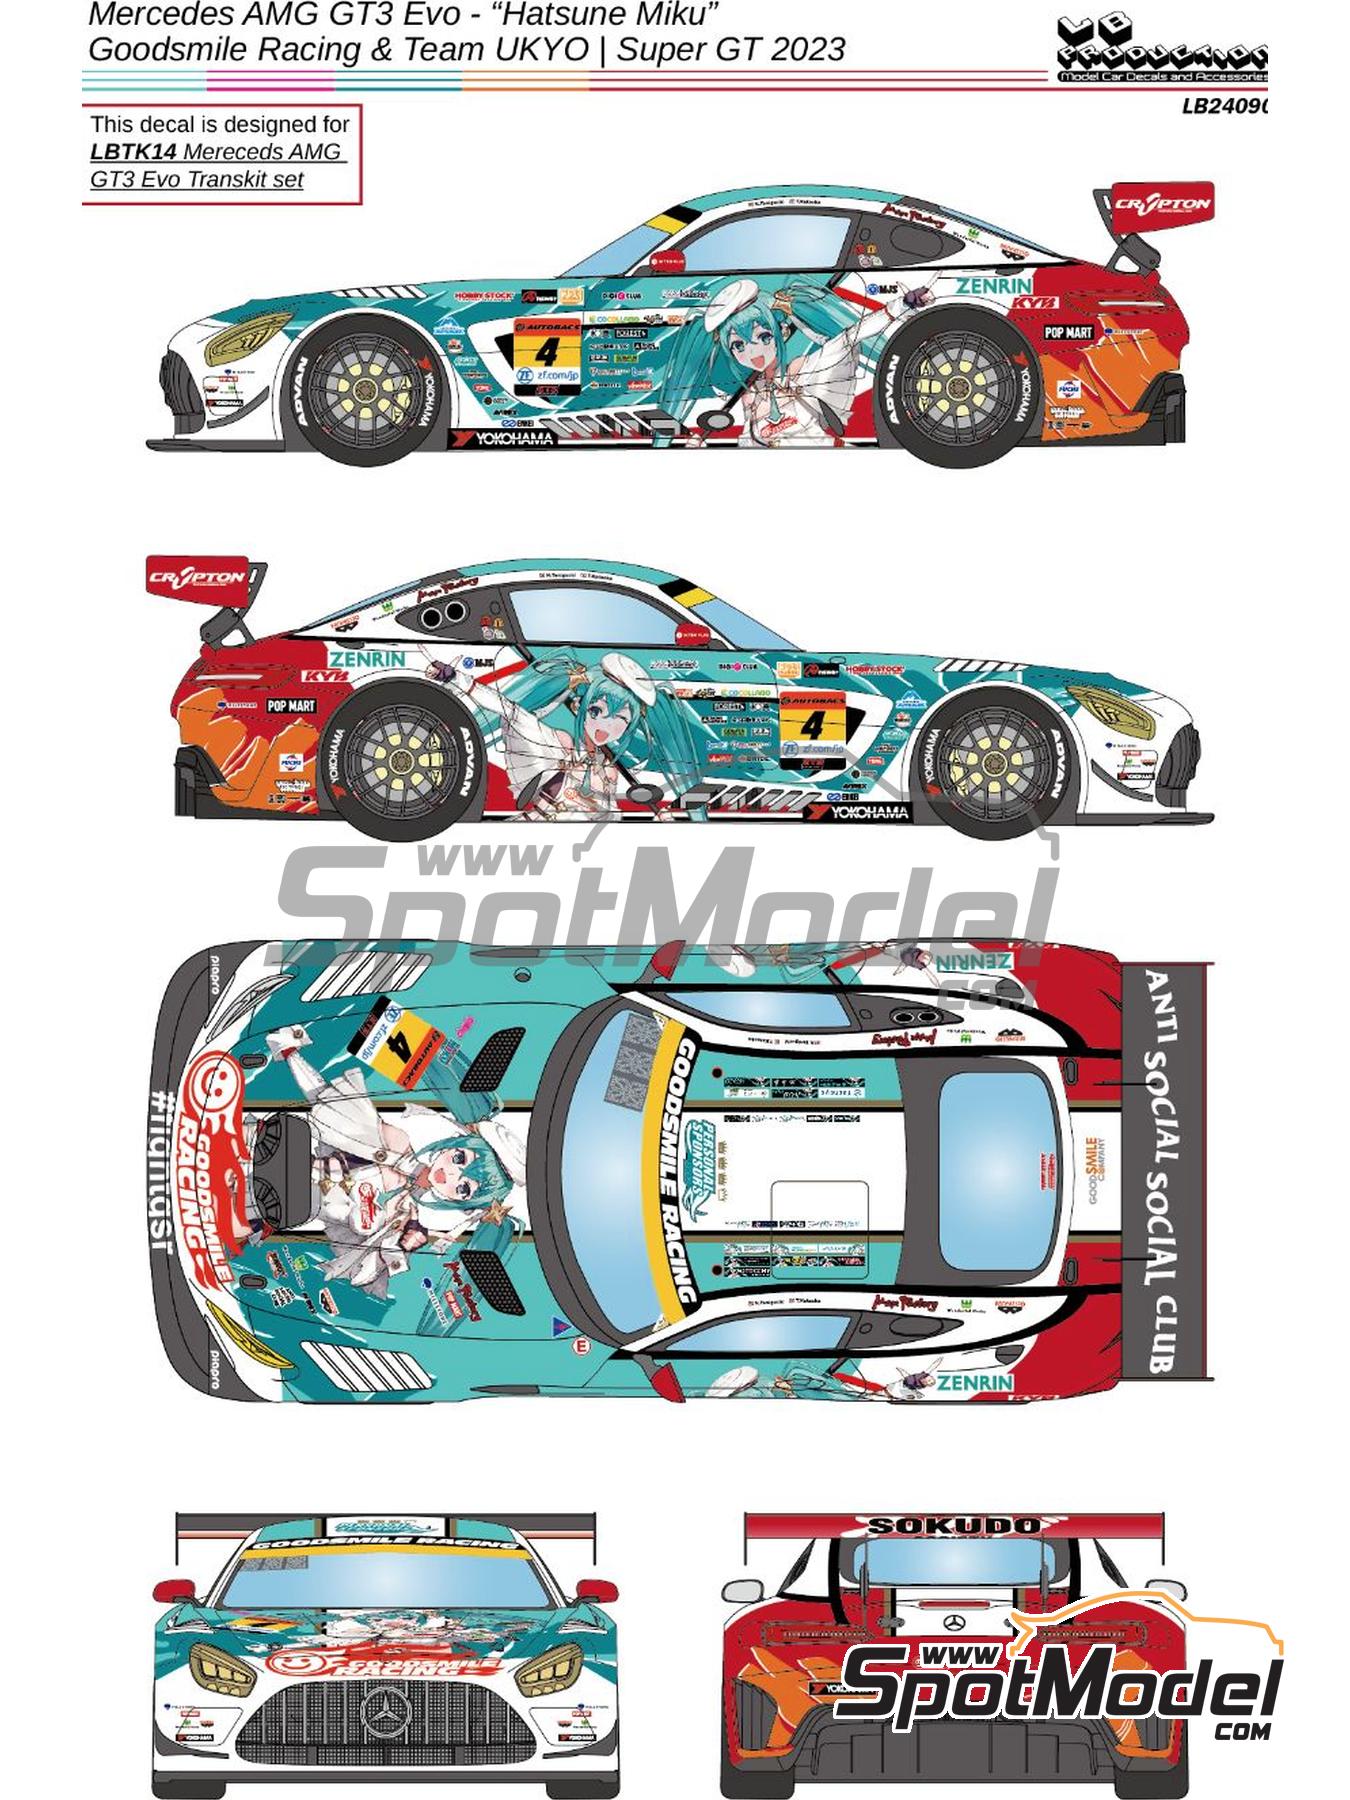 Mercedes Benz AMG GT3 Evo Goodsmile Racing Team sponsored by Hatsune Miku -  Autobacs Super GT Series 2023. Marking / livery in 1/24 scale manufactured